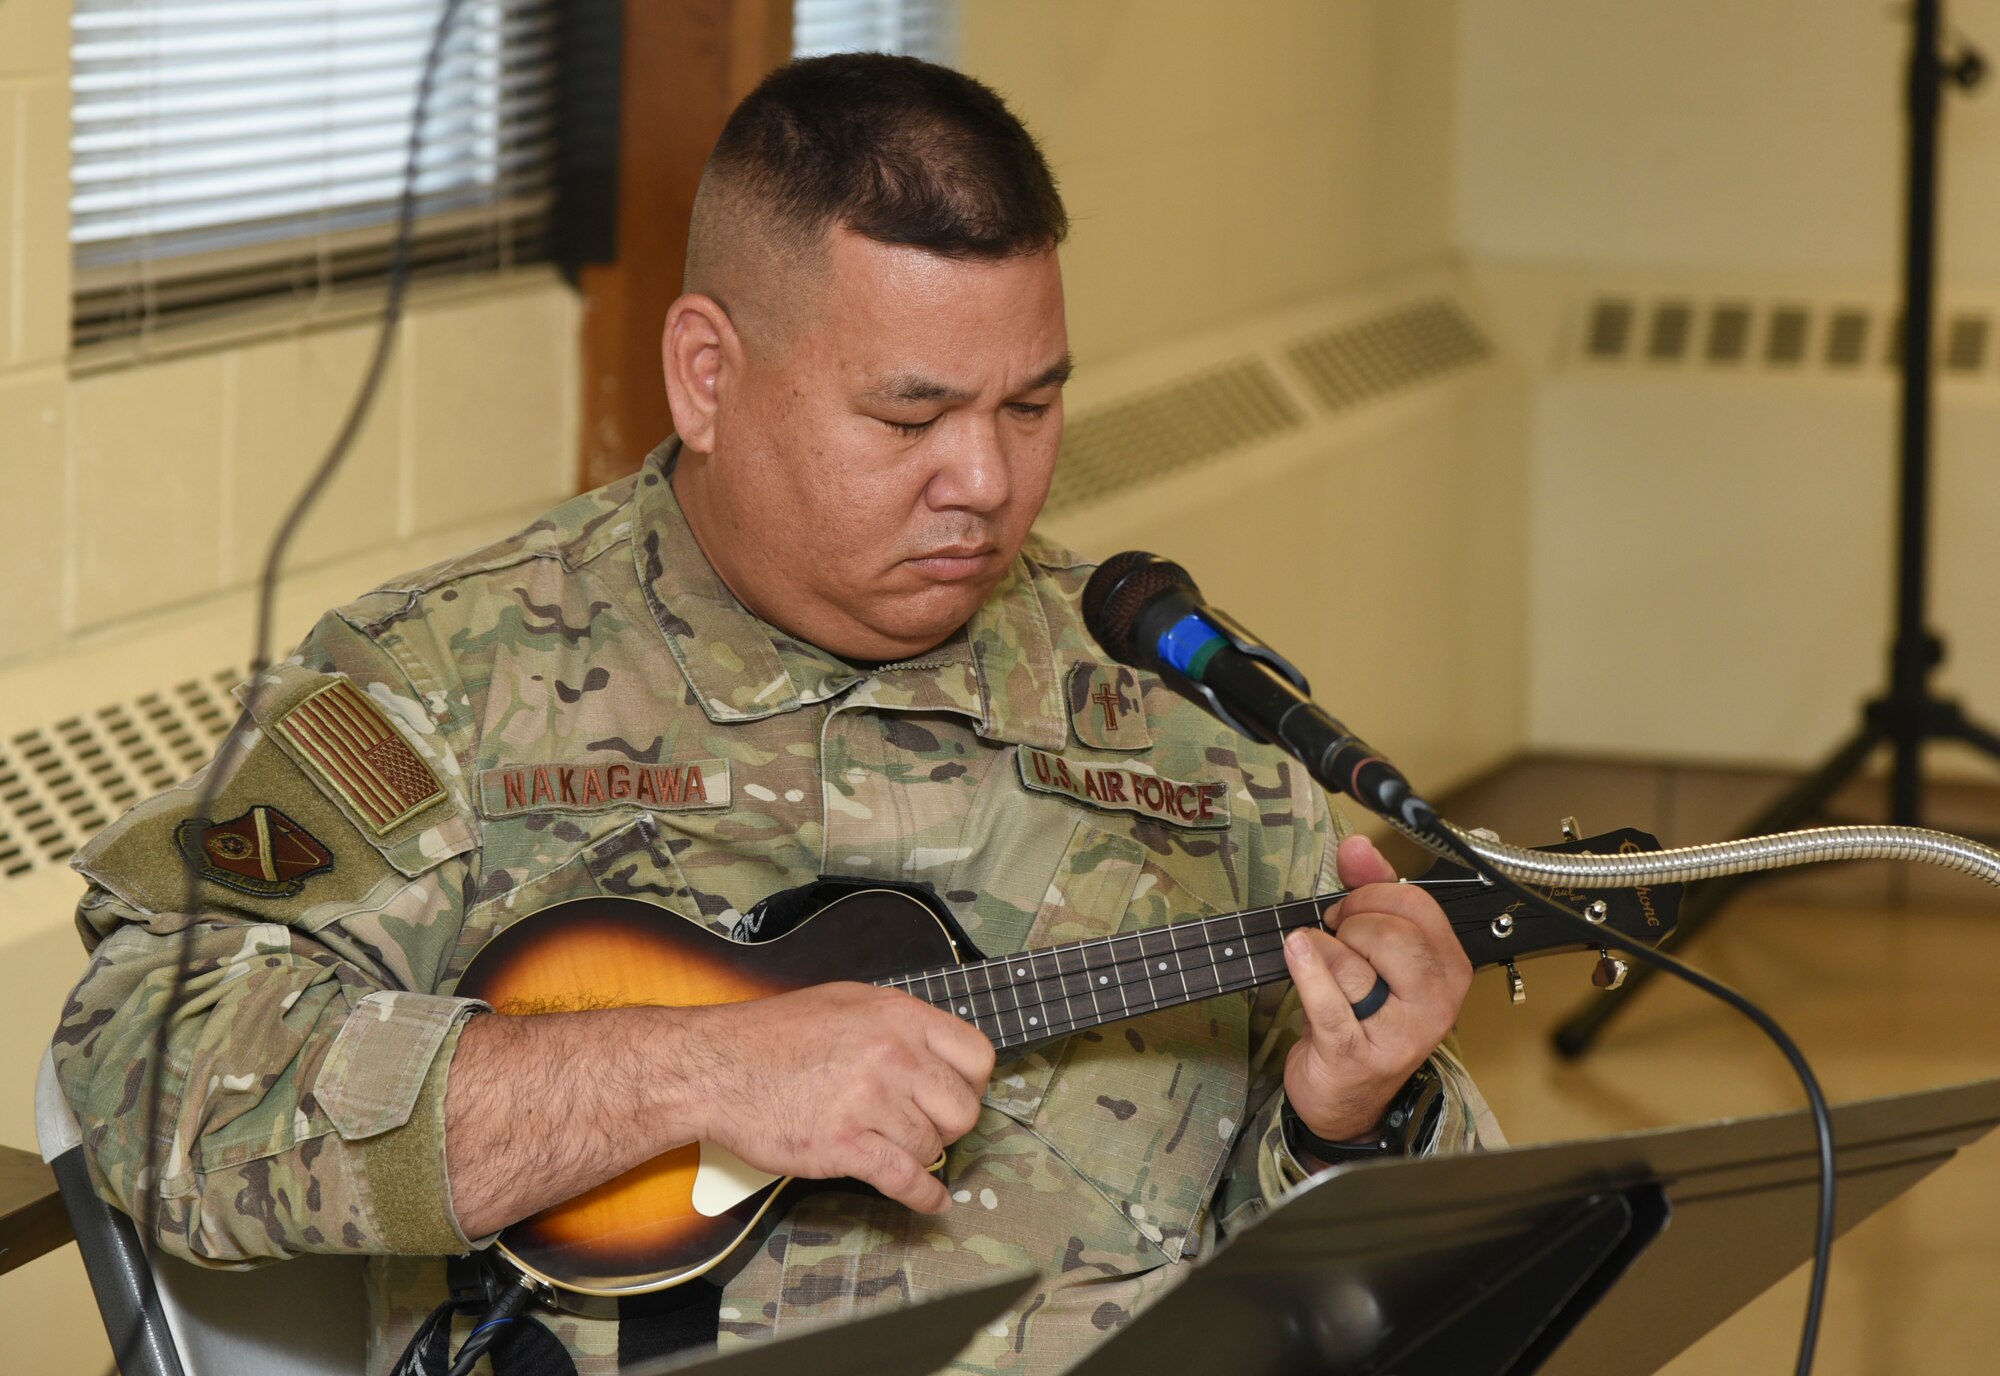 U.S. Air Force Chaplain (Maj.) Craig H. Nakagawa, 377th Deputy Wing chaplain, plays the ukulele at the Diversity Heritage Day event on Kirtland Air Force Base, N.M., Nov. 6, 2019. The event included music, food sampling, a personality workshop and panel discussion. (U.S. Air Force photo by Airman 1st Class Ireland Summers)